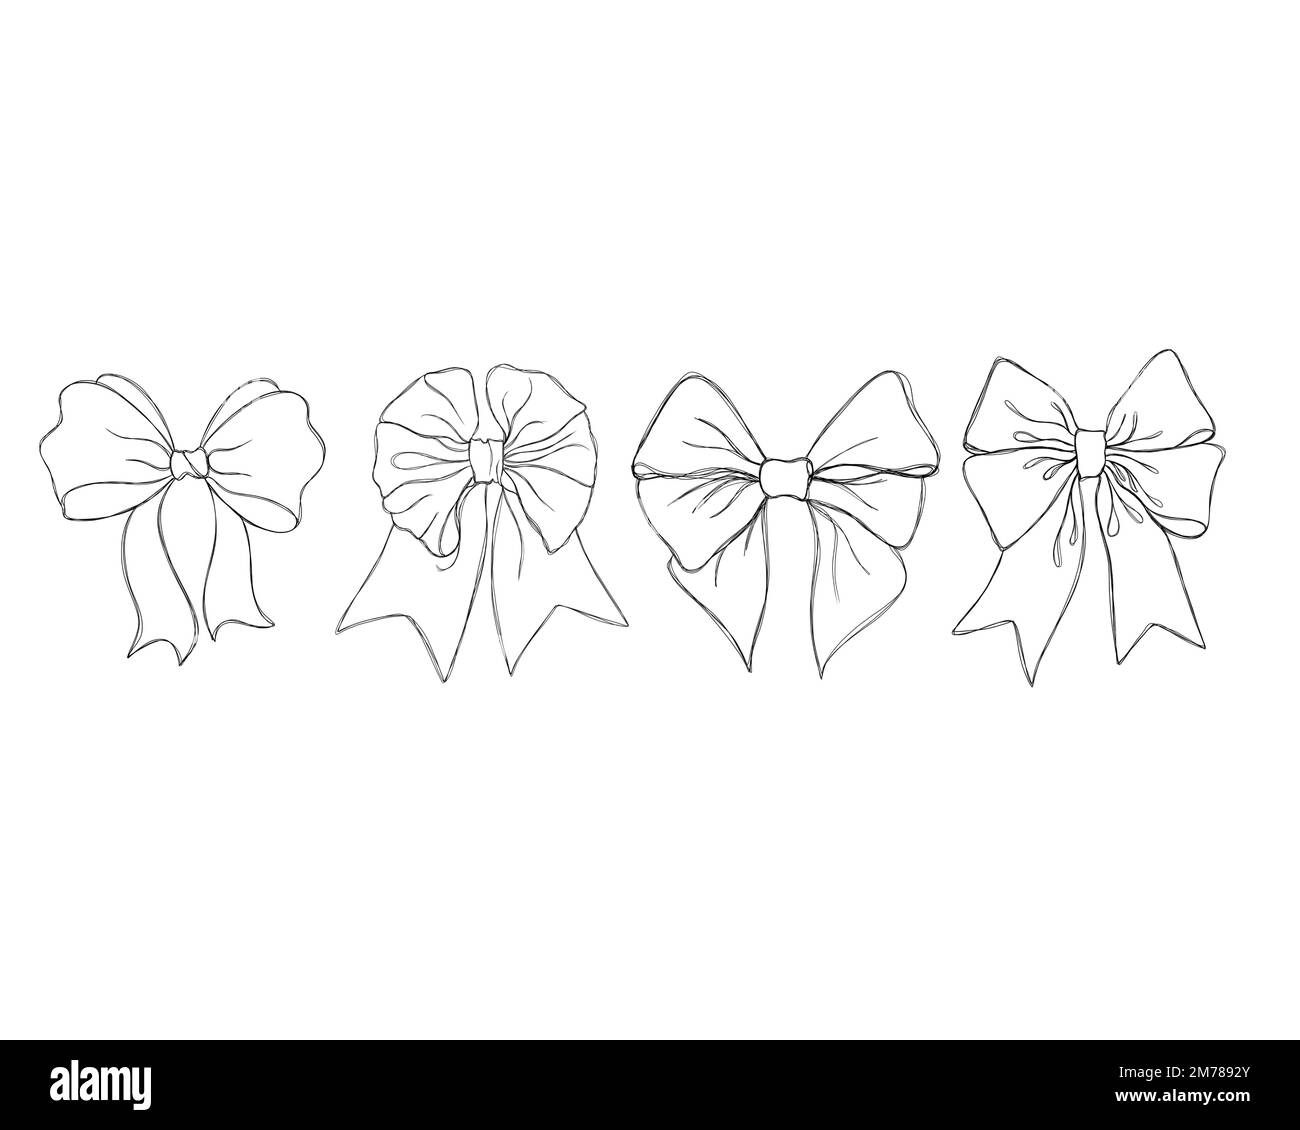 Rose Flower and Garter Bow Tattoo Stock Vector - Illustration of plant,  decorative: 259434598